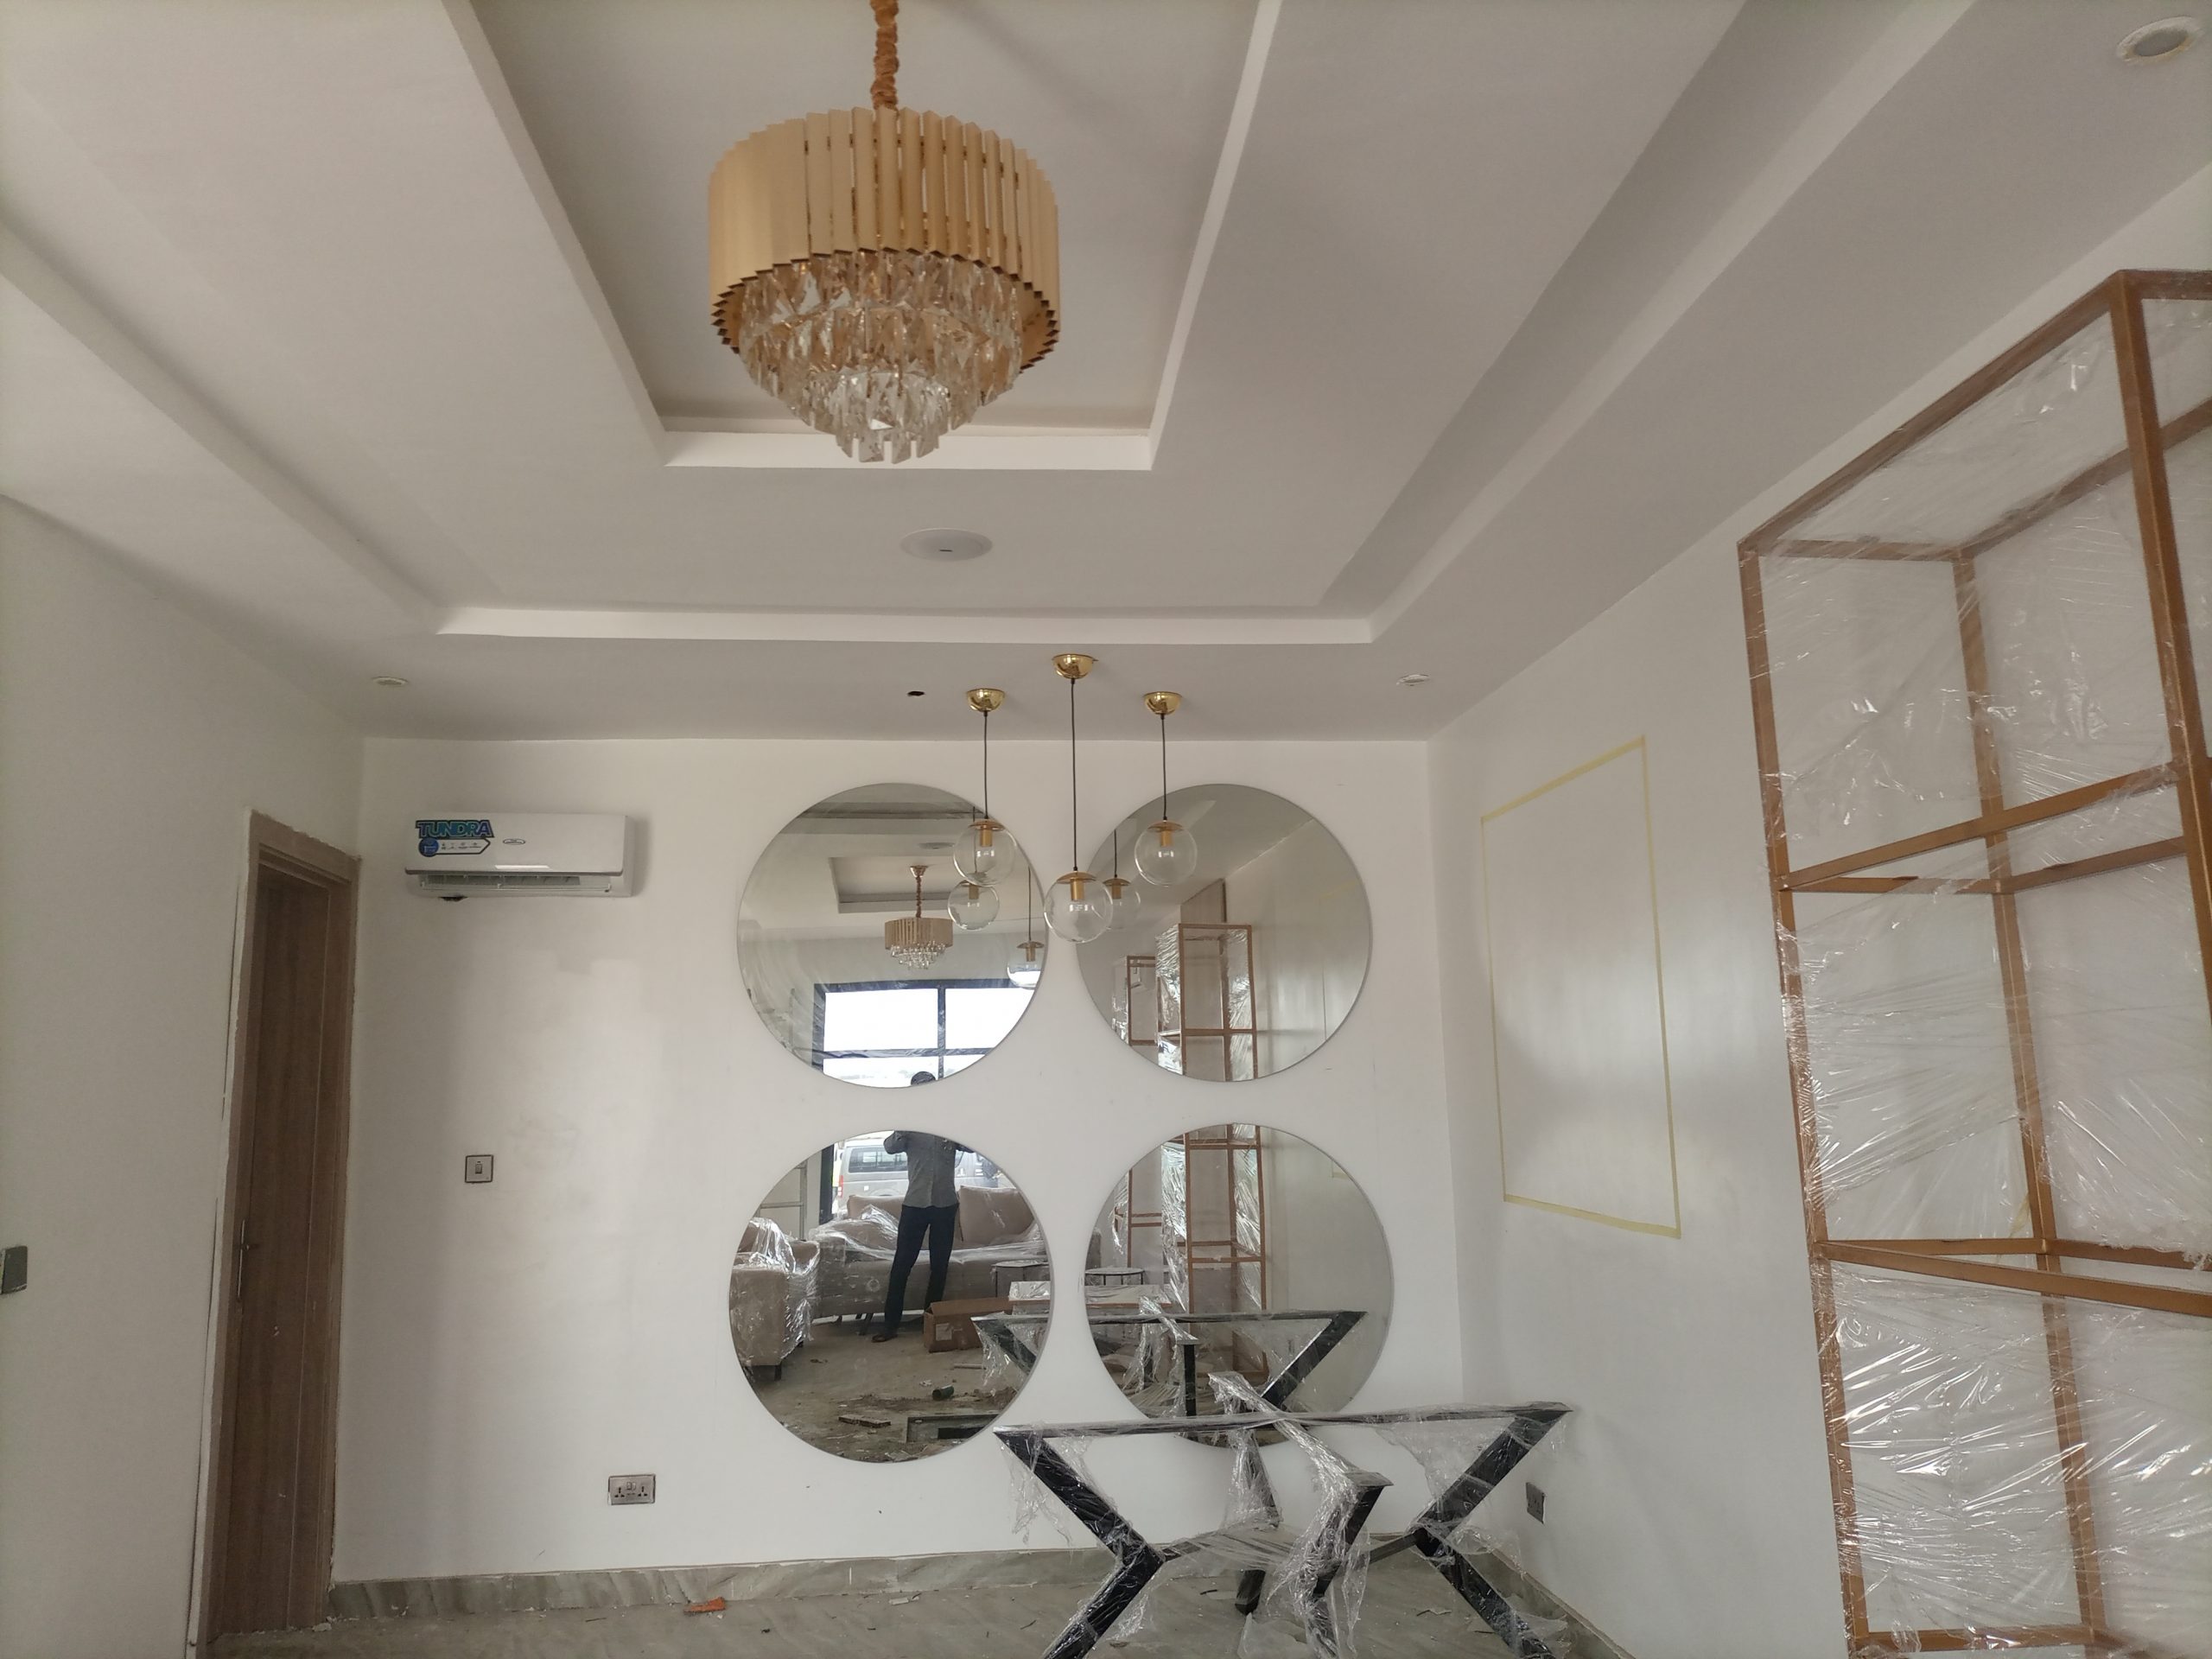 Interior Dinning Area of 2 Bedroom Duplex For Sale in Ajah with installment payment at Ambiance Estate